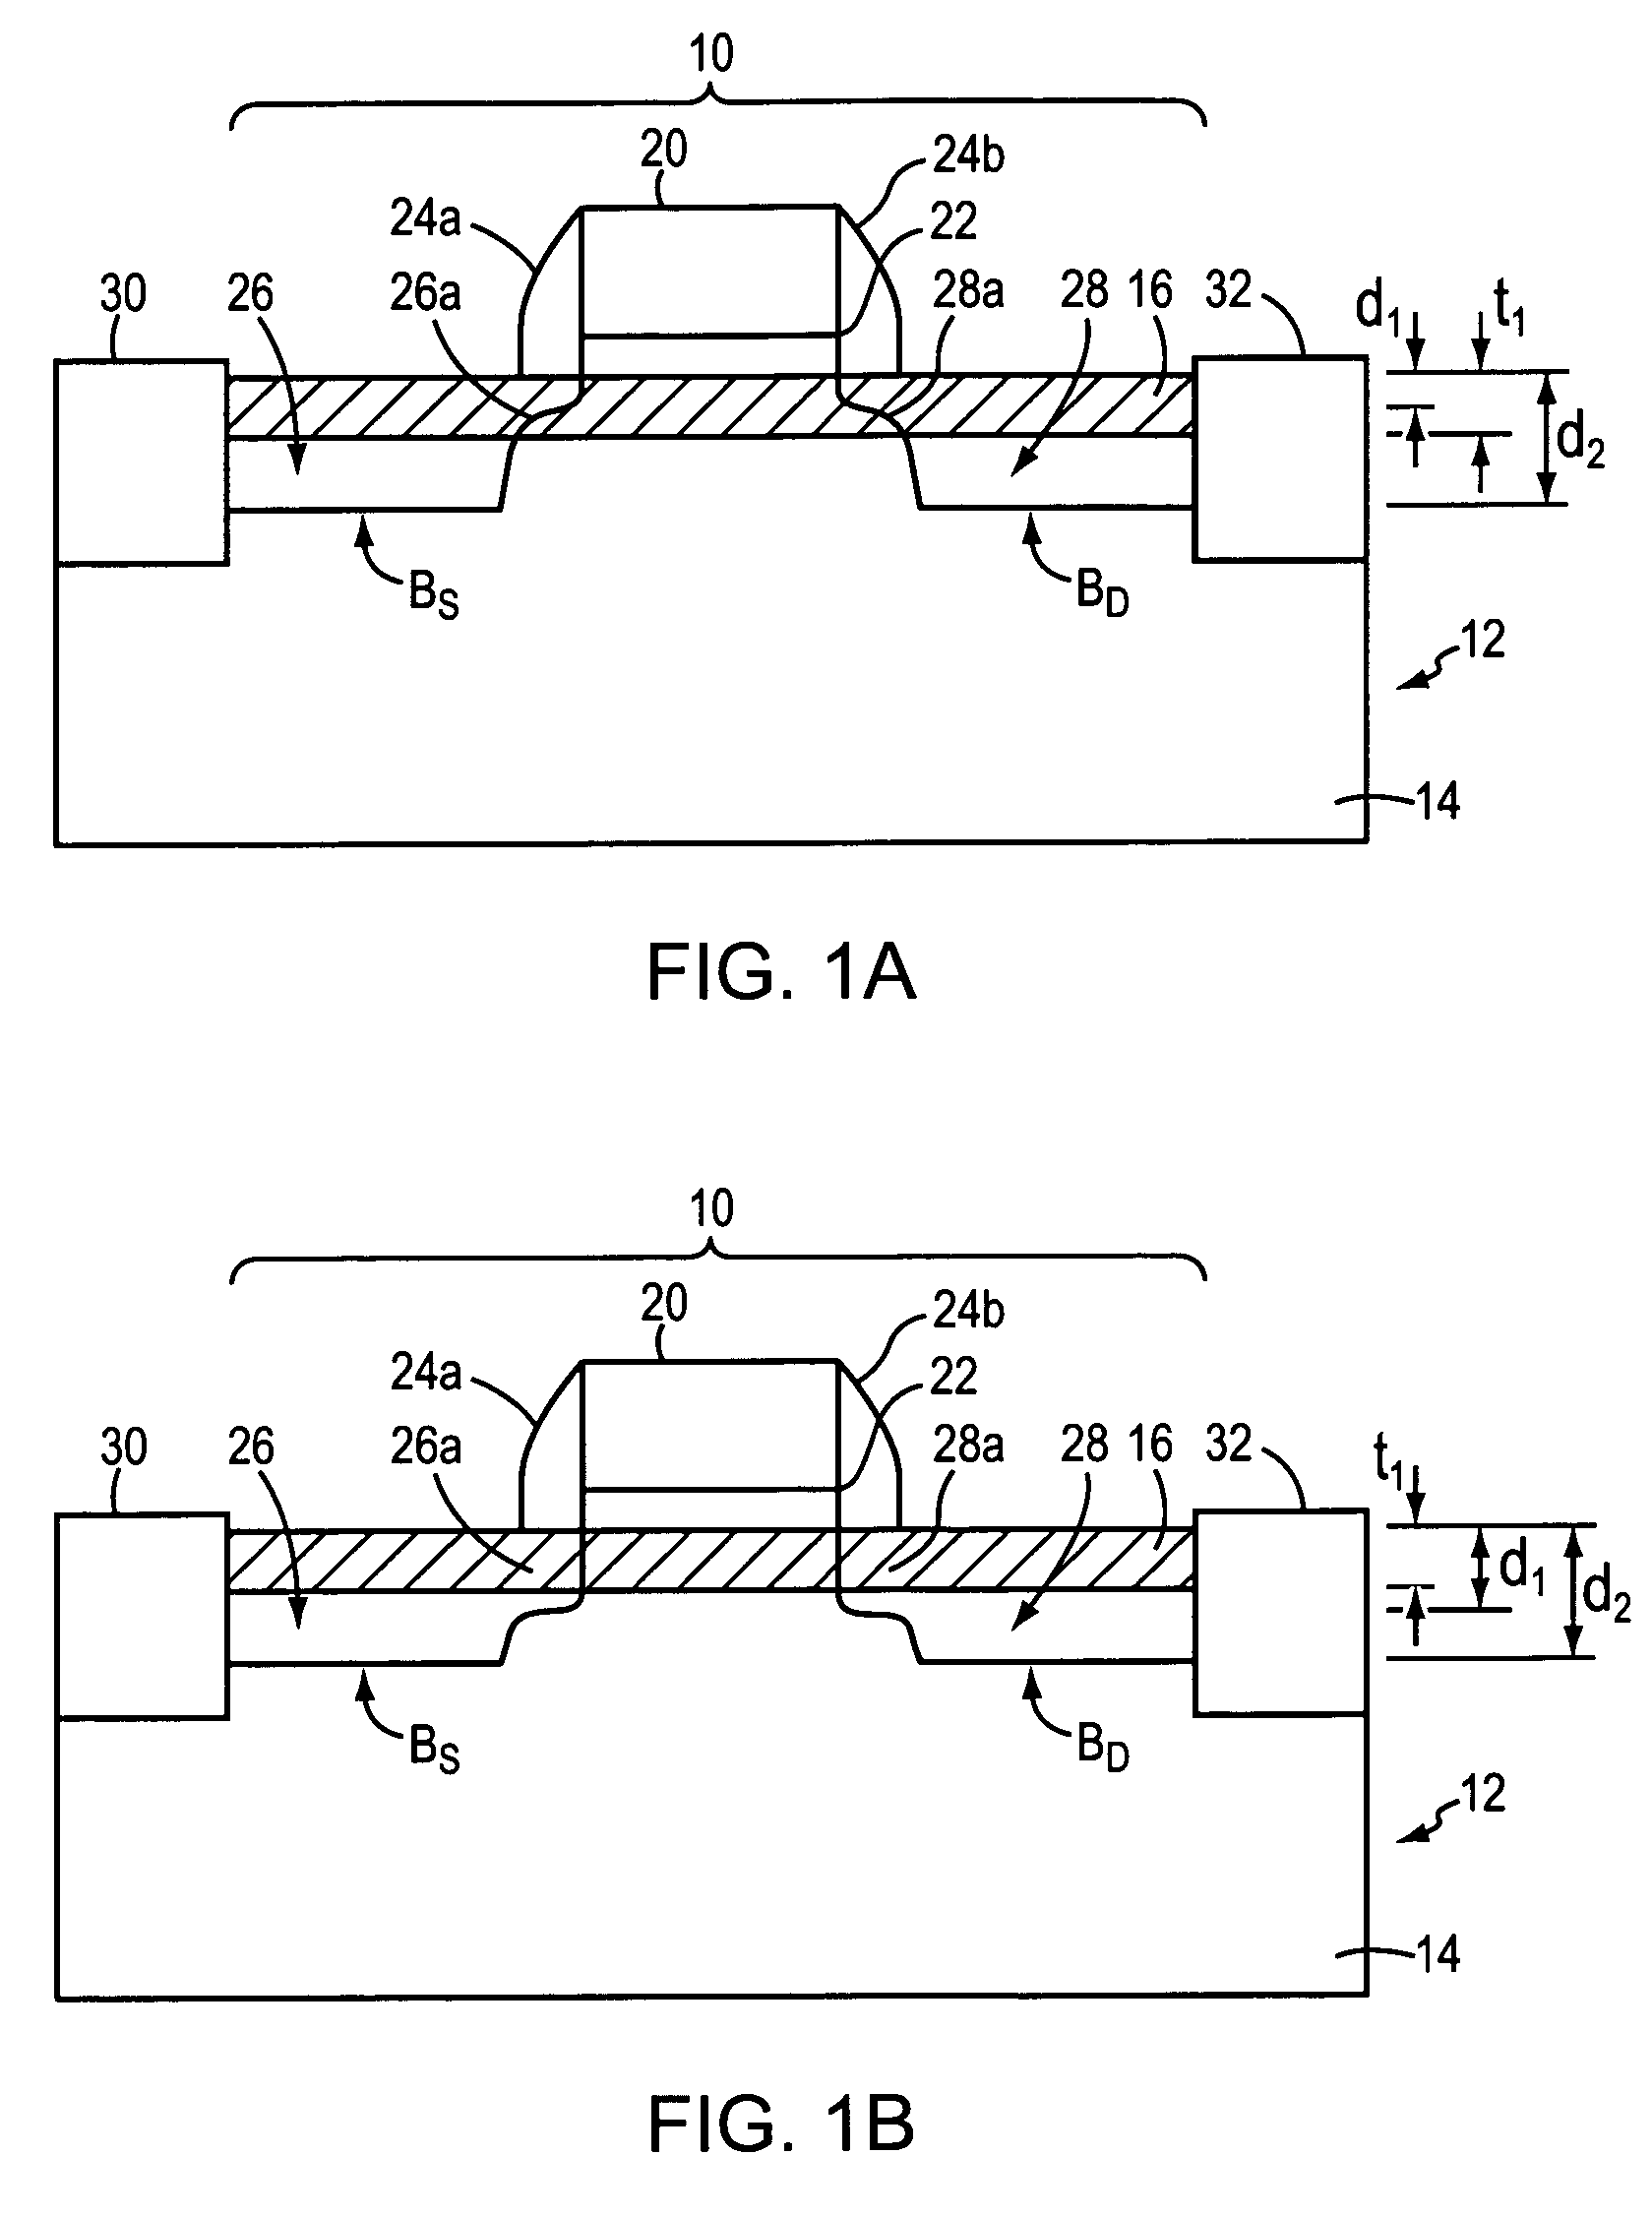 Elevated source and drain elements for strained-channel heterojuntion field-effect transistors